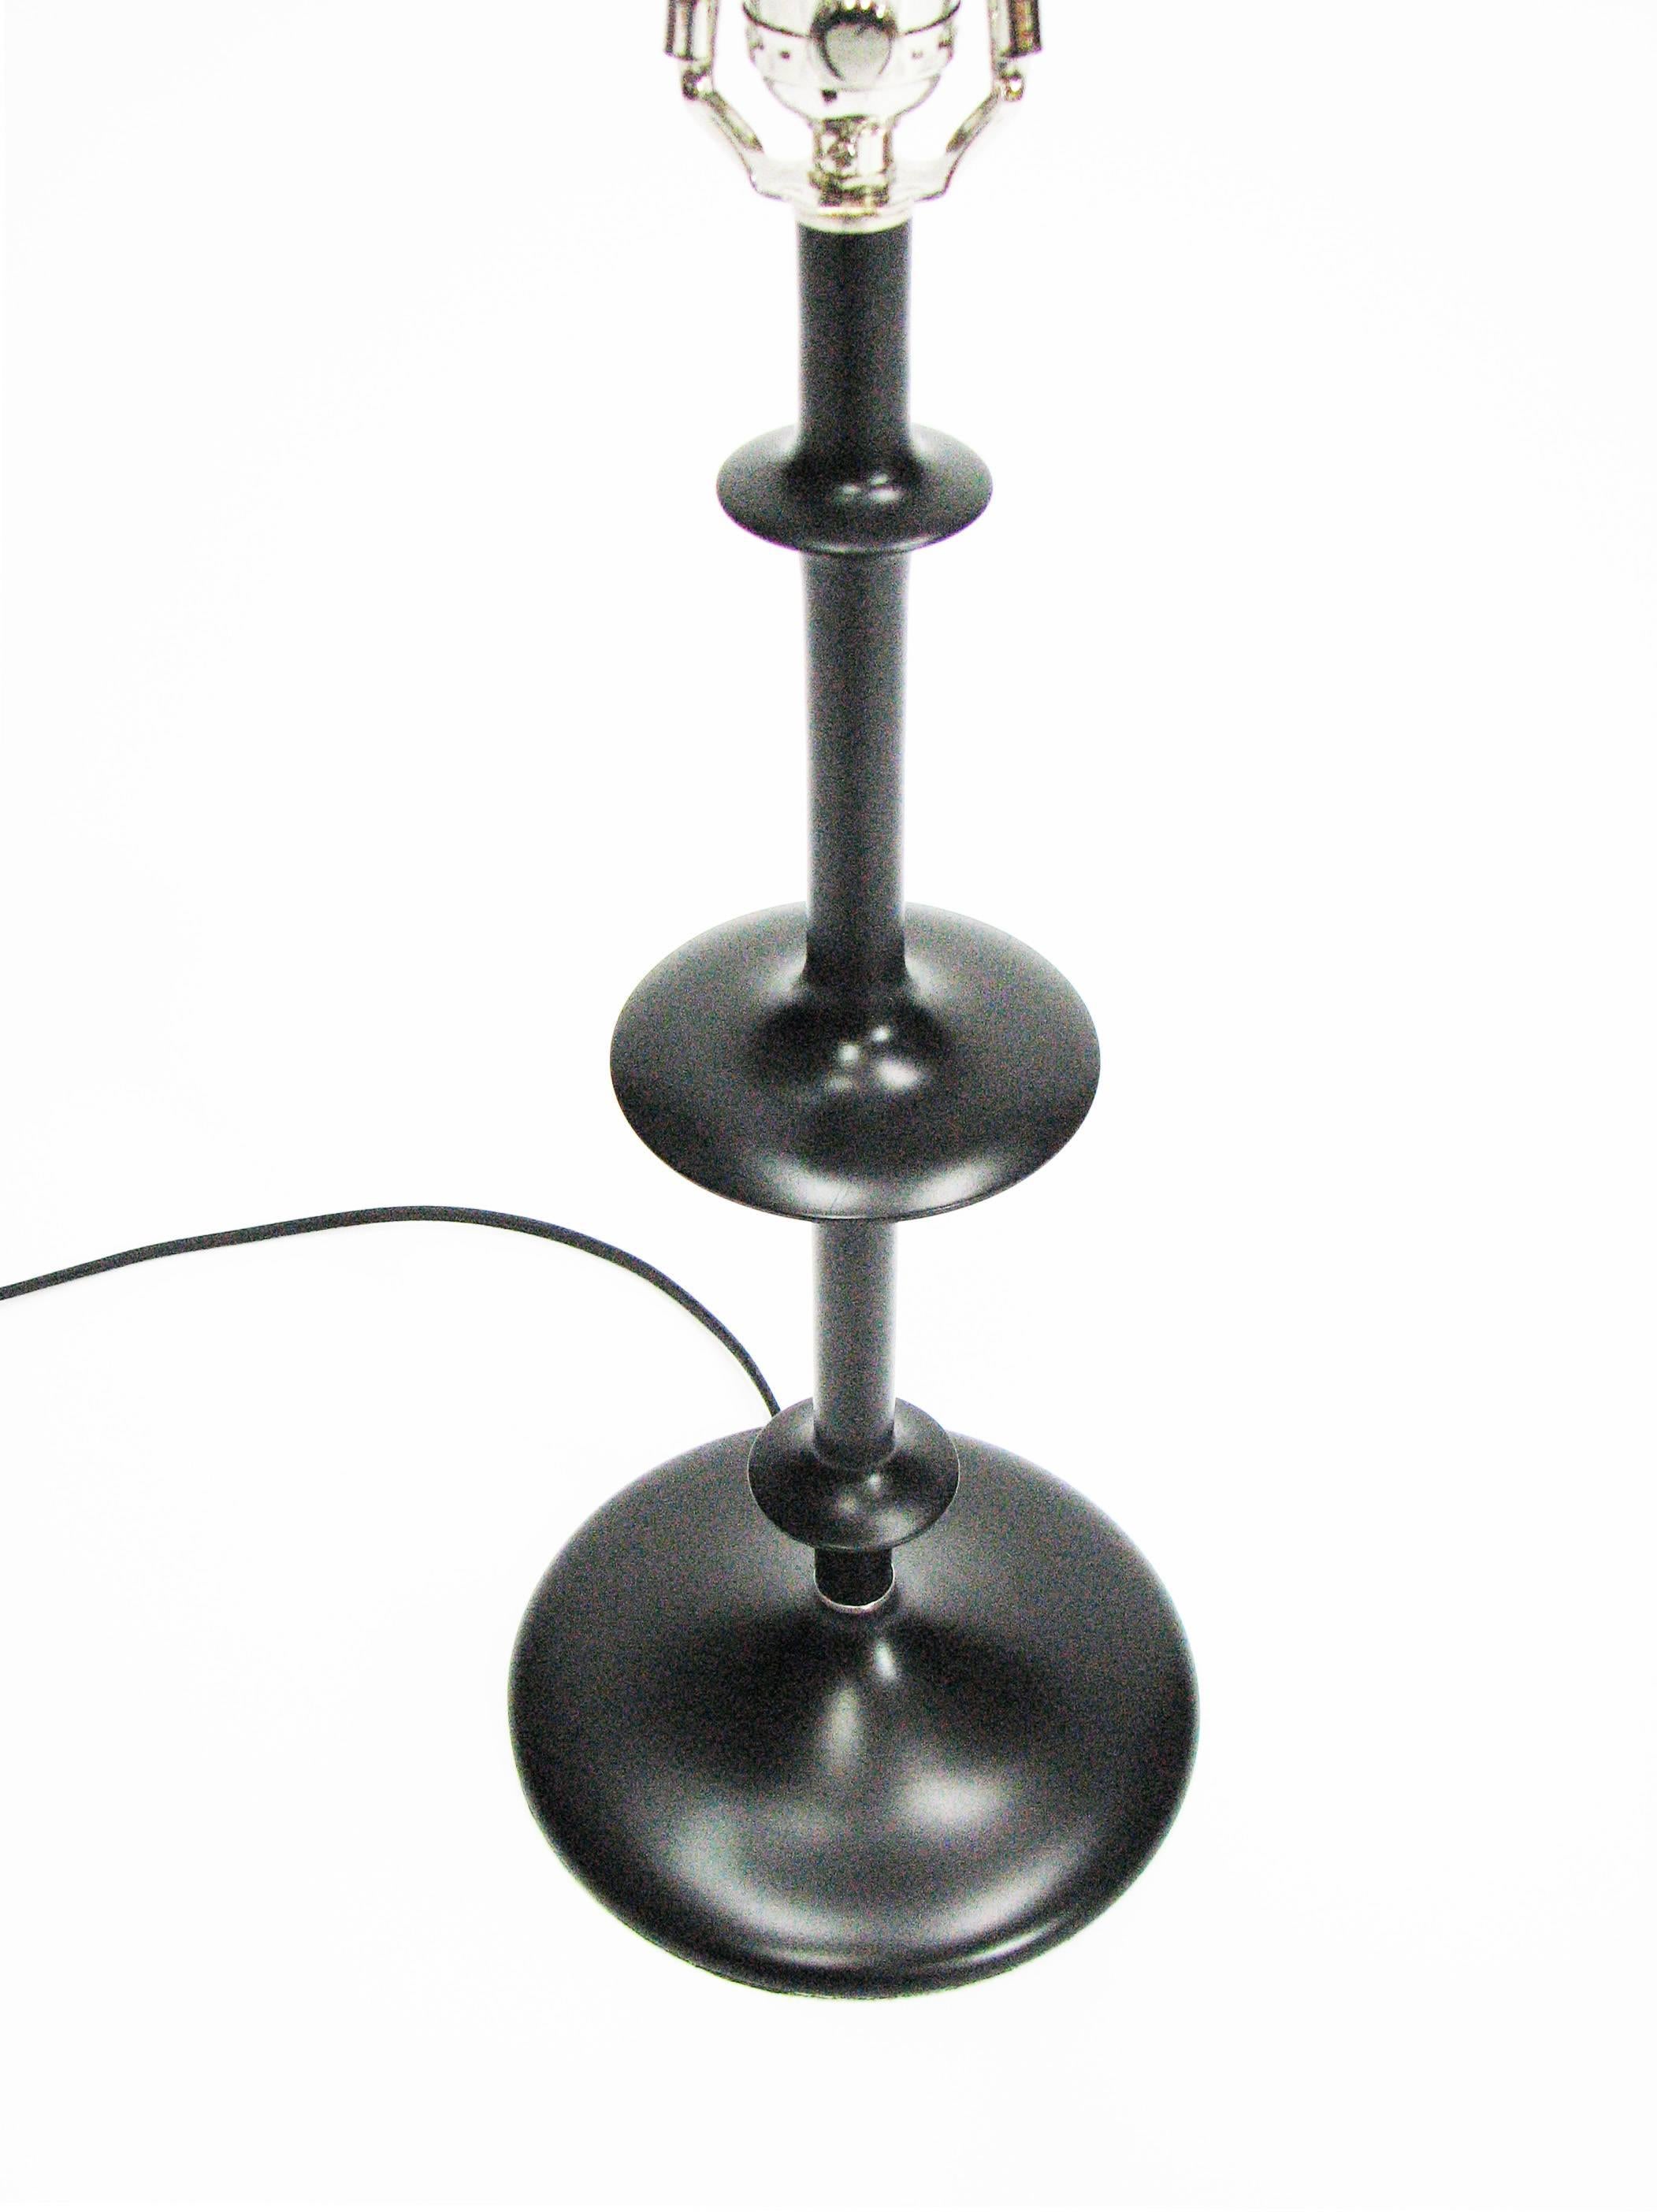 Pair of Exquisitely-Detailed Spindle Lamps by 20th Century Design Studios In Good Condition For Sale In Portland, OR